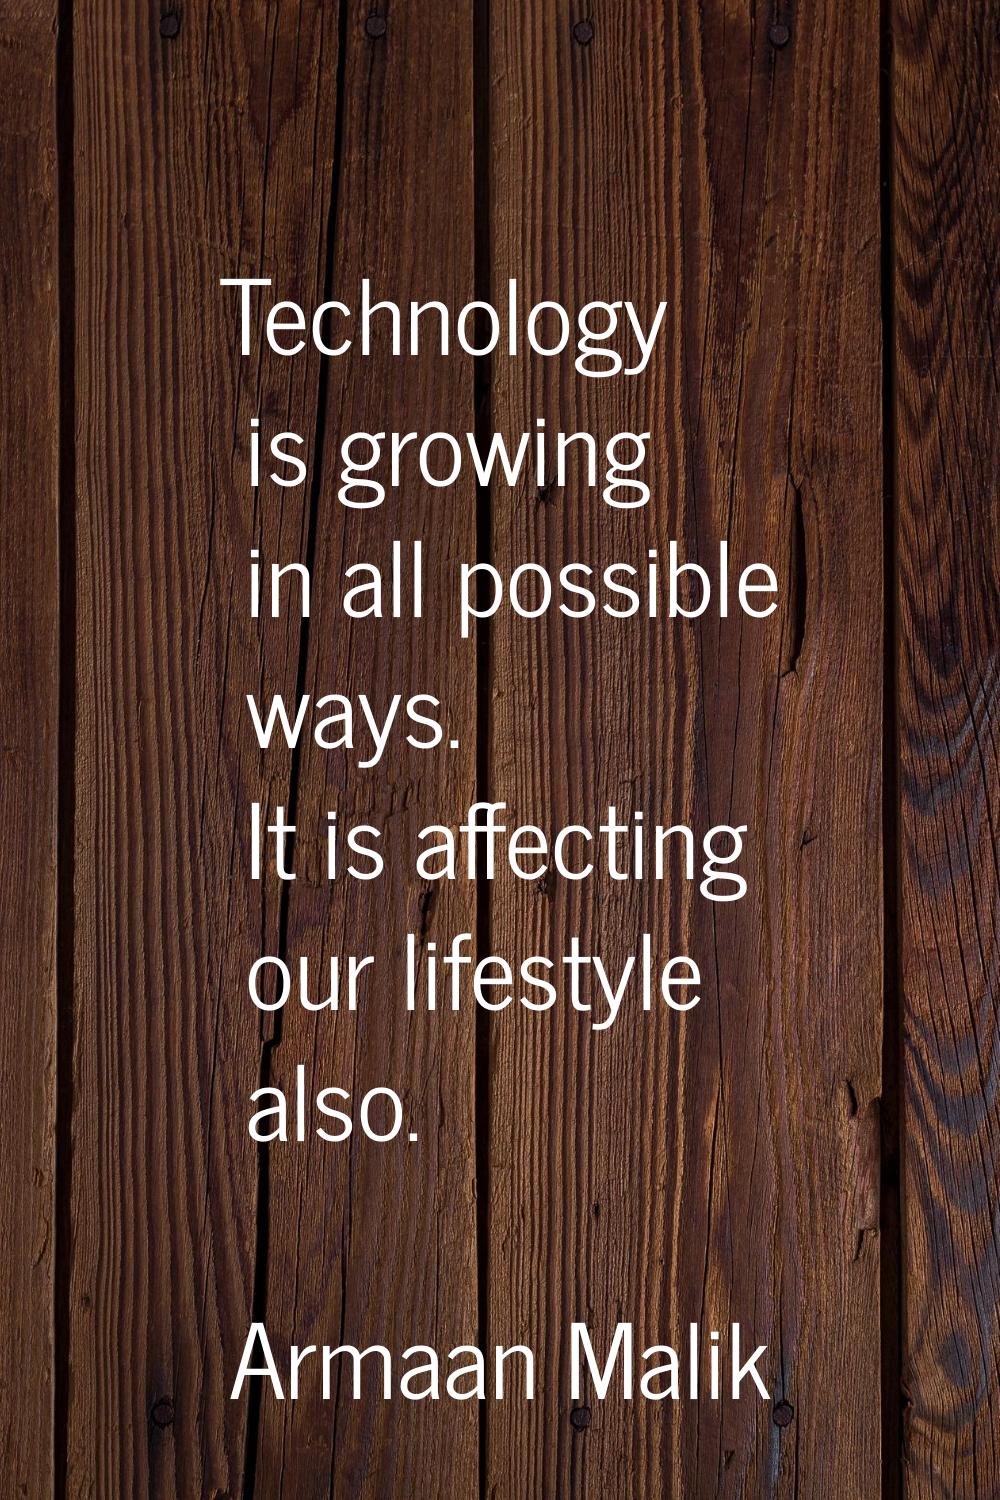 Technology is growing in all possible ways. It is affecting our lifestyle also.